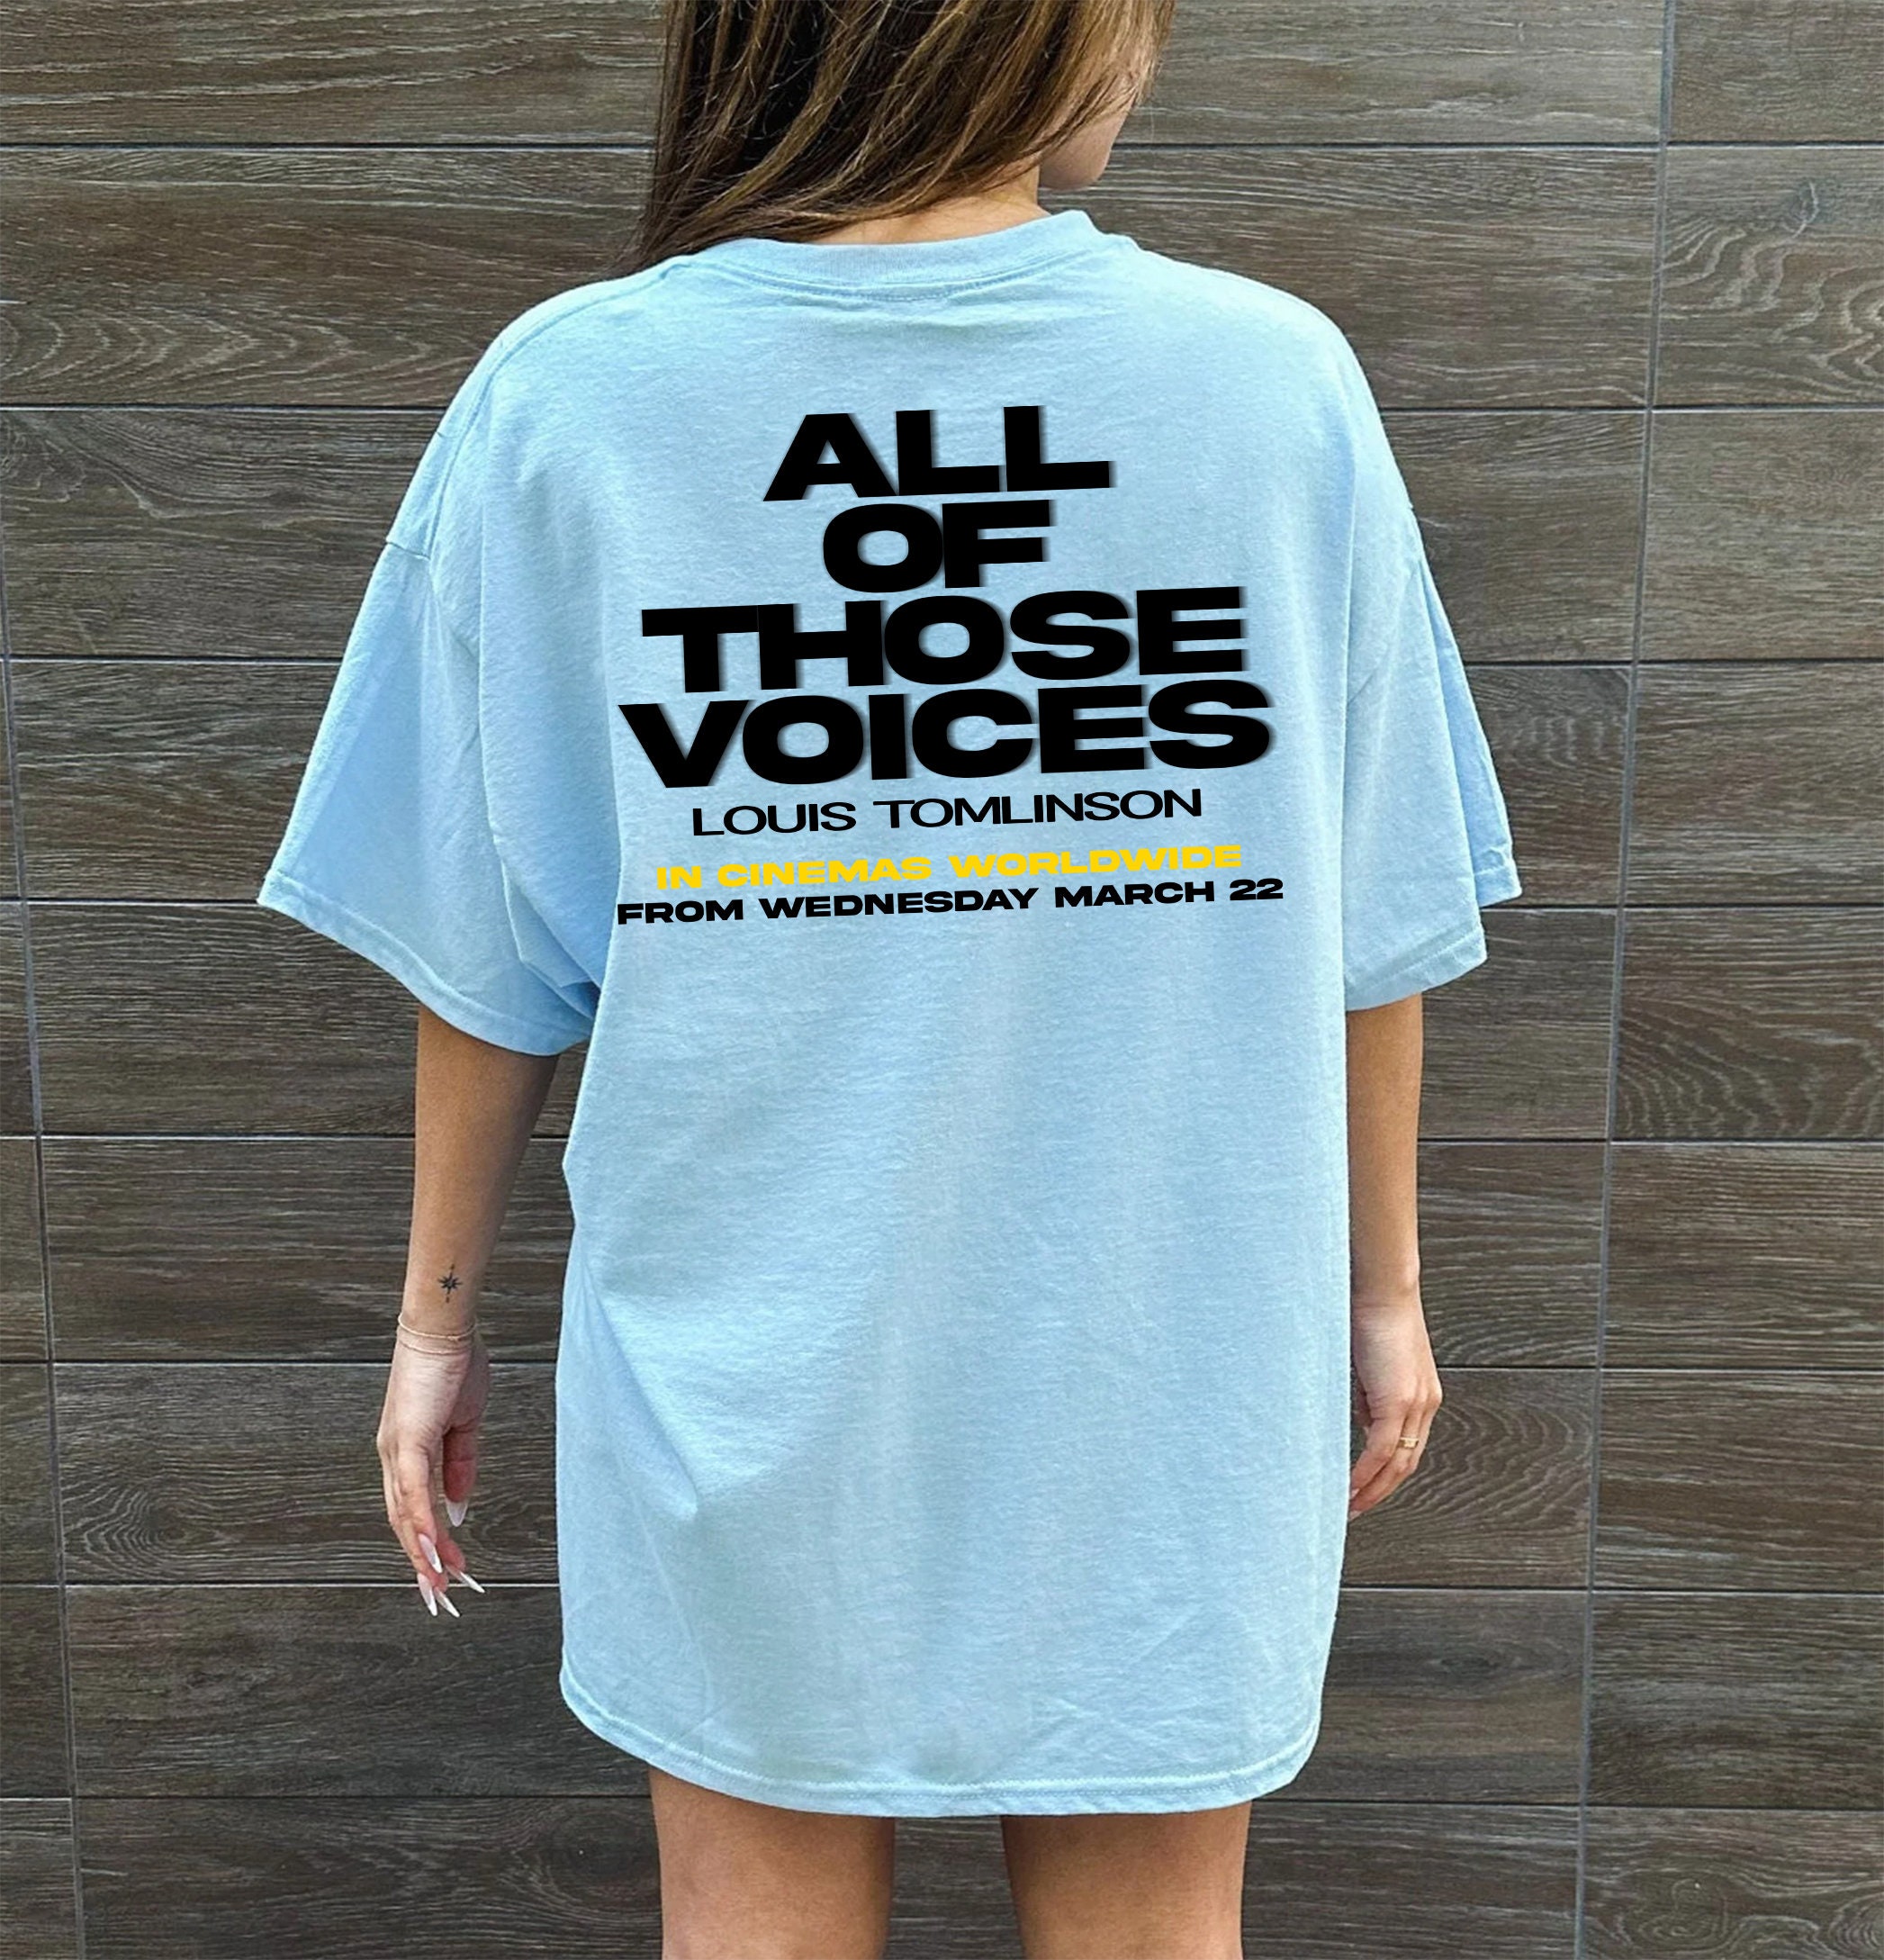 Buy All Of Those Voices Louis Tomlinson Shirt For Free Shipping